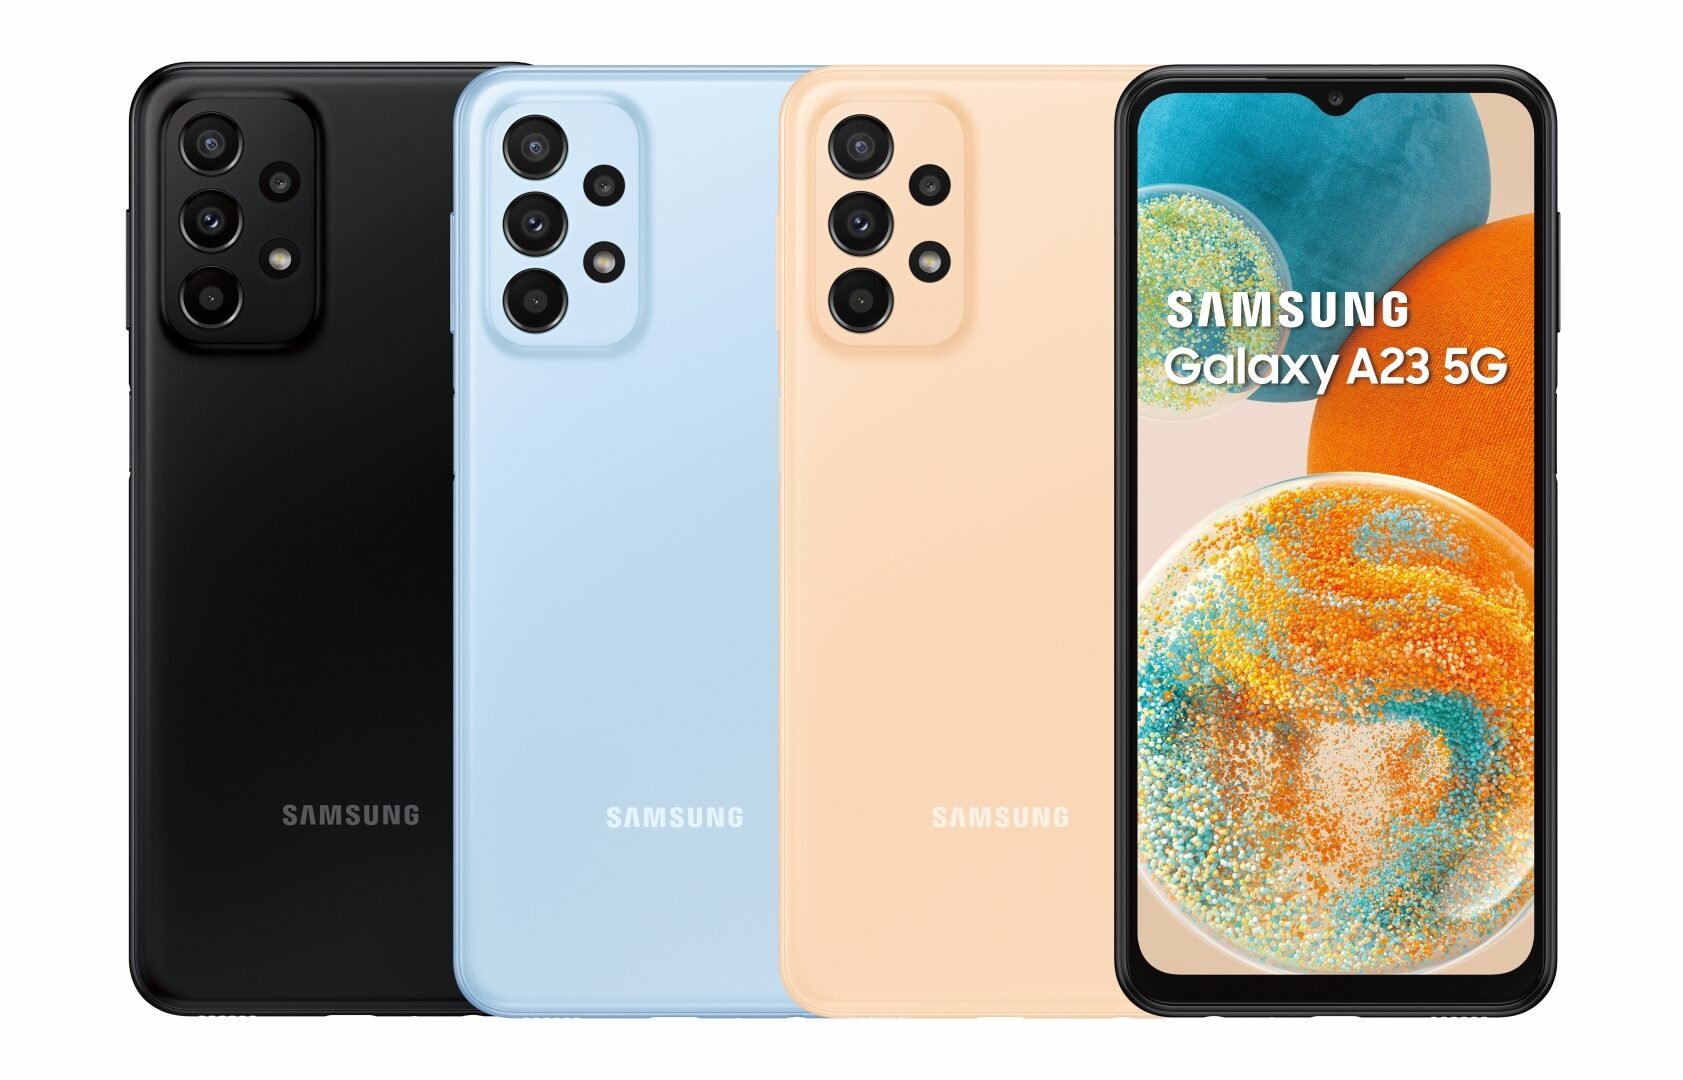 Samsung confirms Galaxy A23 5G release date, price, wall